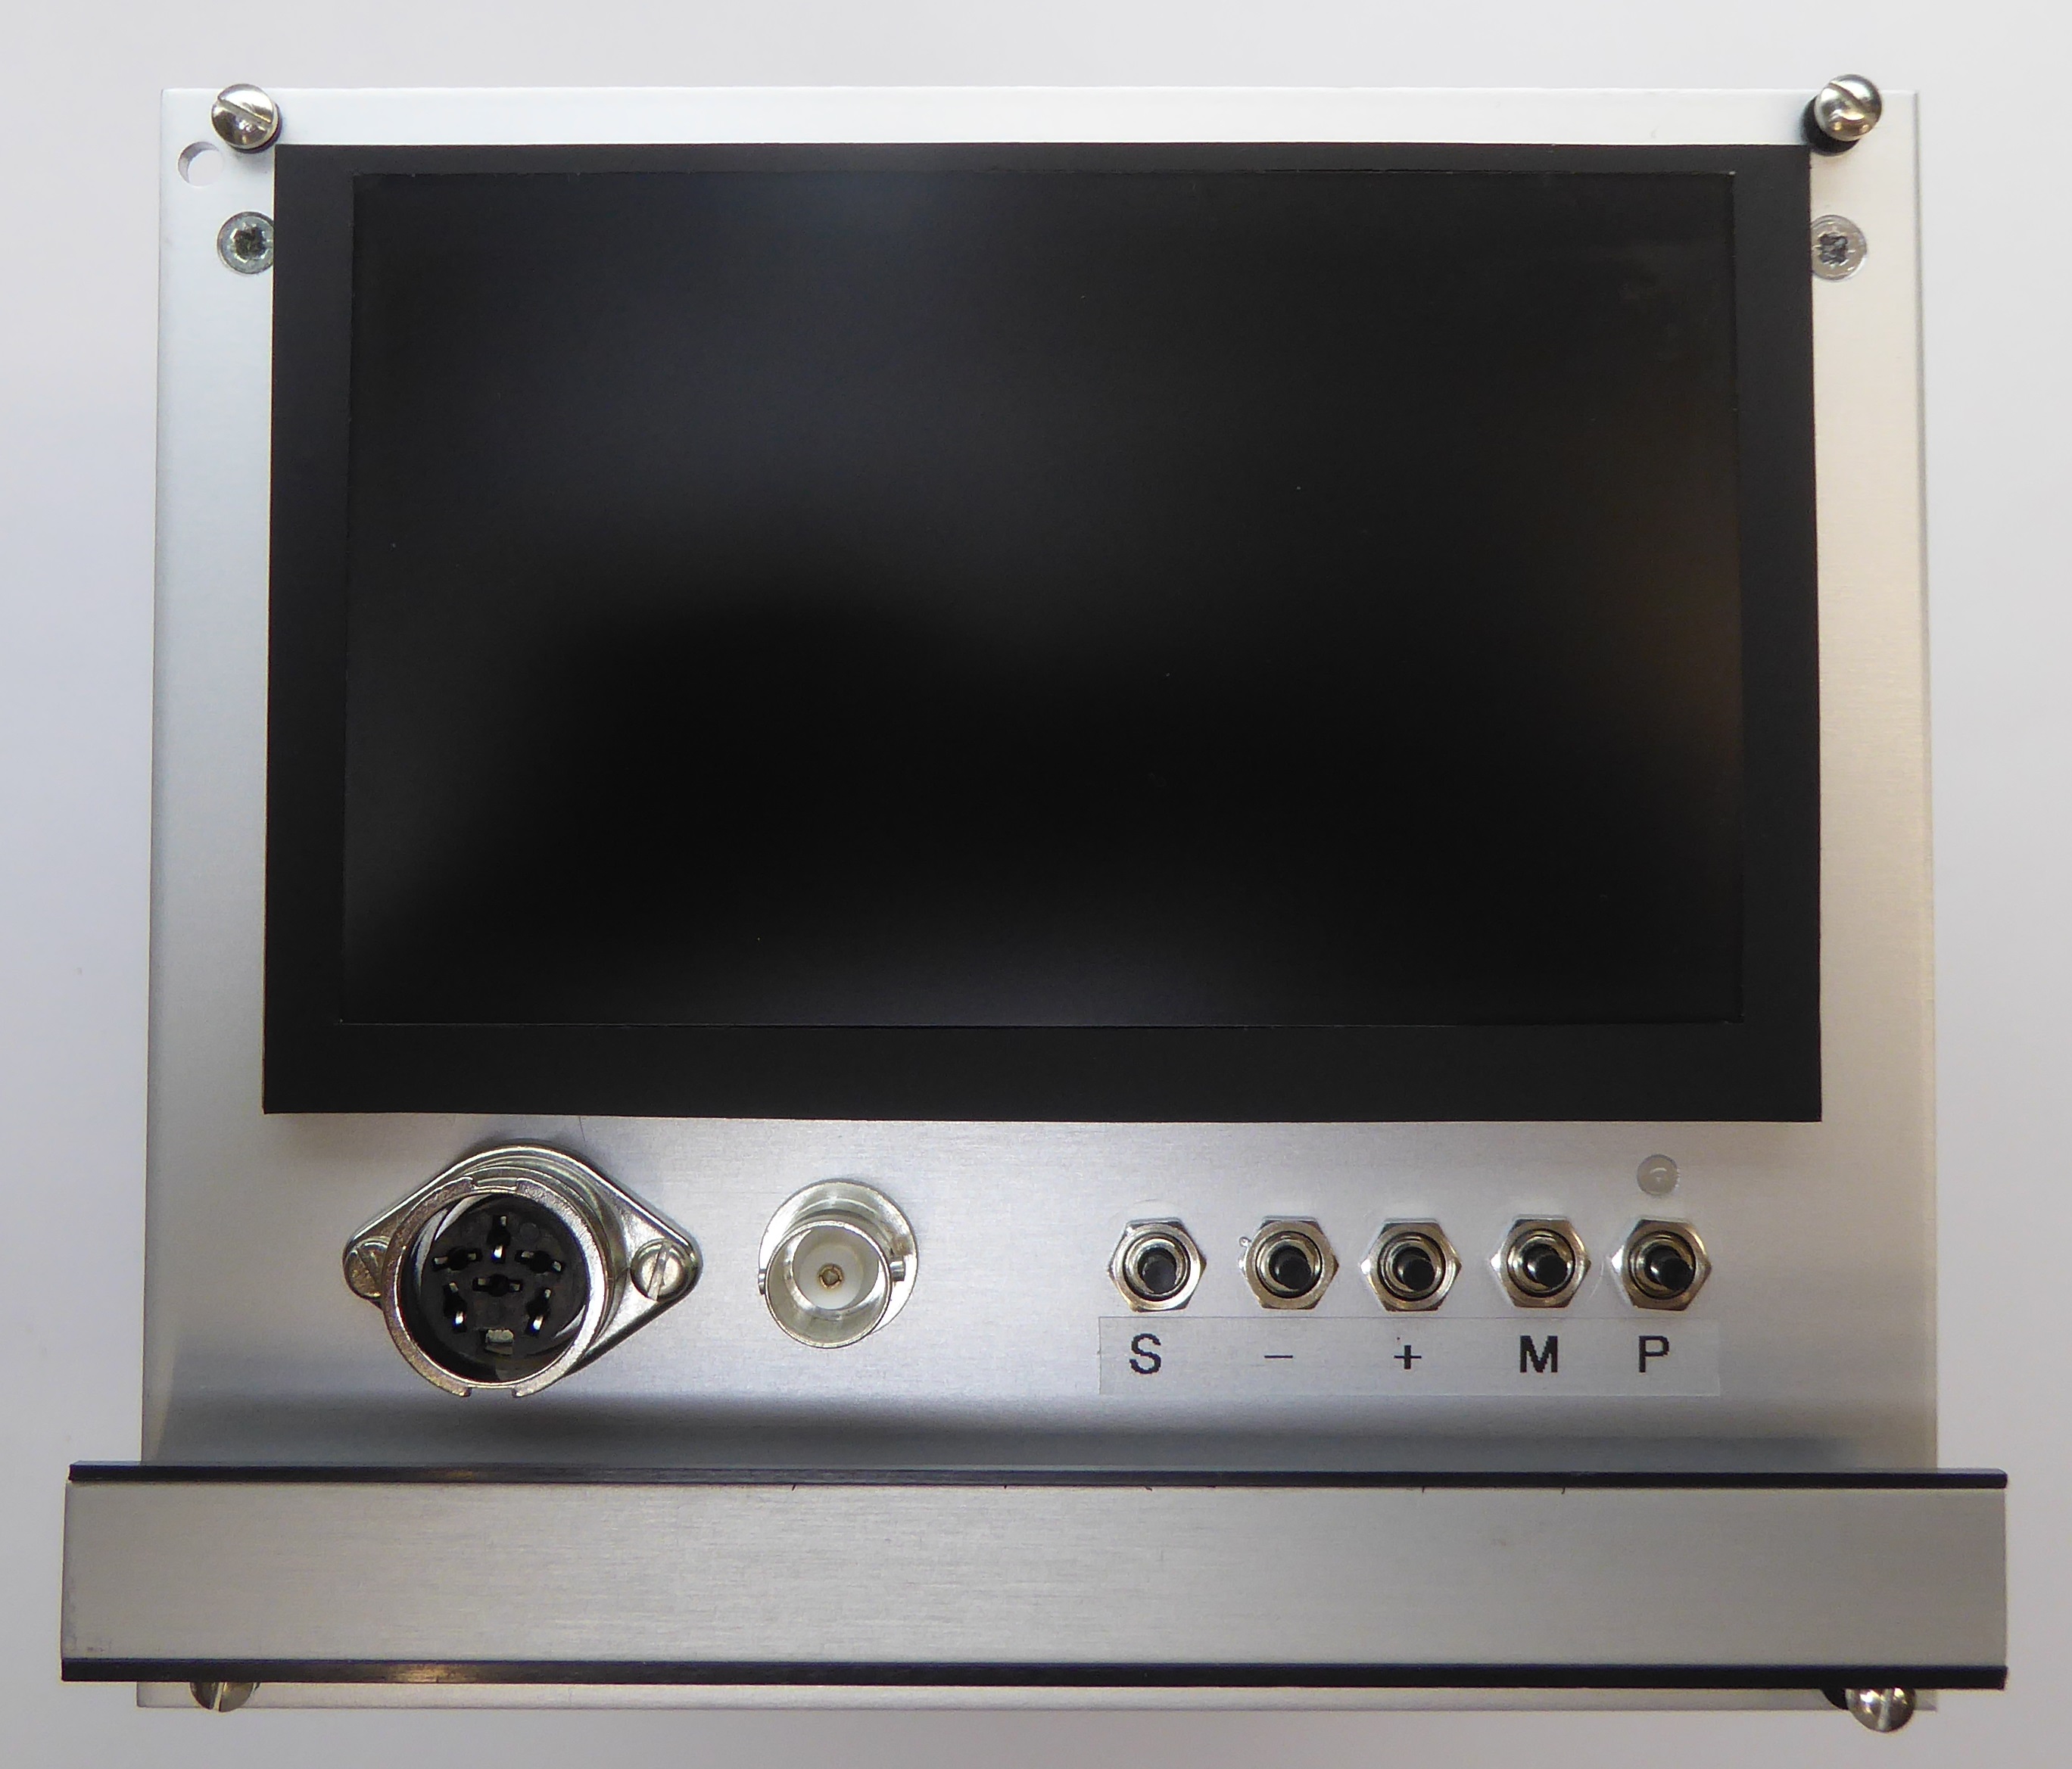 LCD Monitor Module Front View Photo